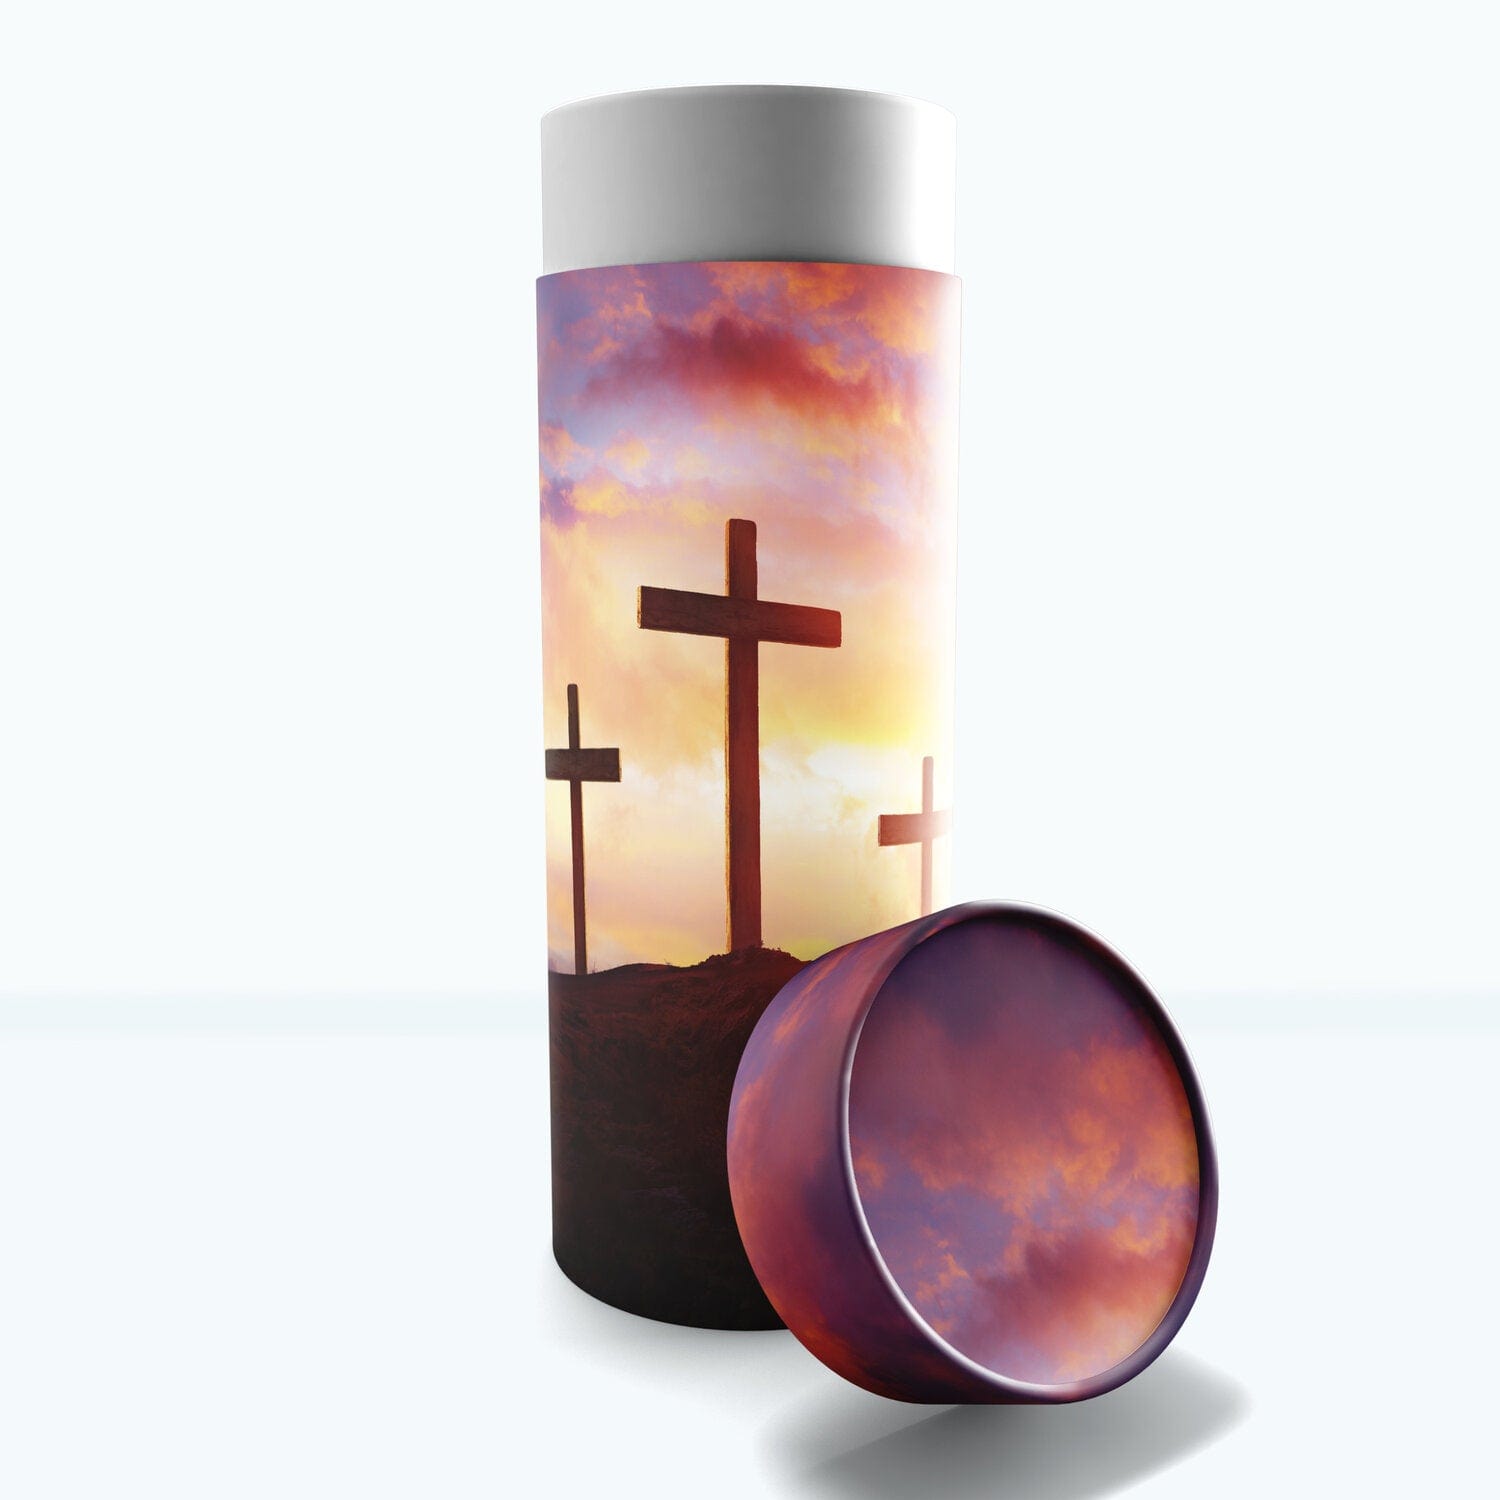 Commemorative Cremation Urns Small Three Crosses - Biodegradable & Eco Friendly Burial or Scattering Urn / Tube